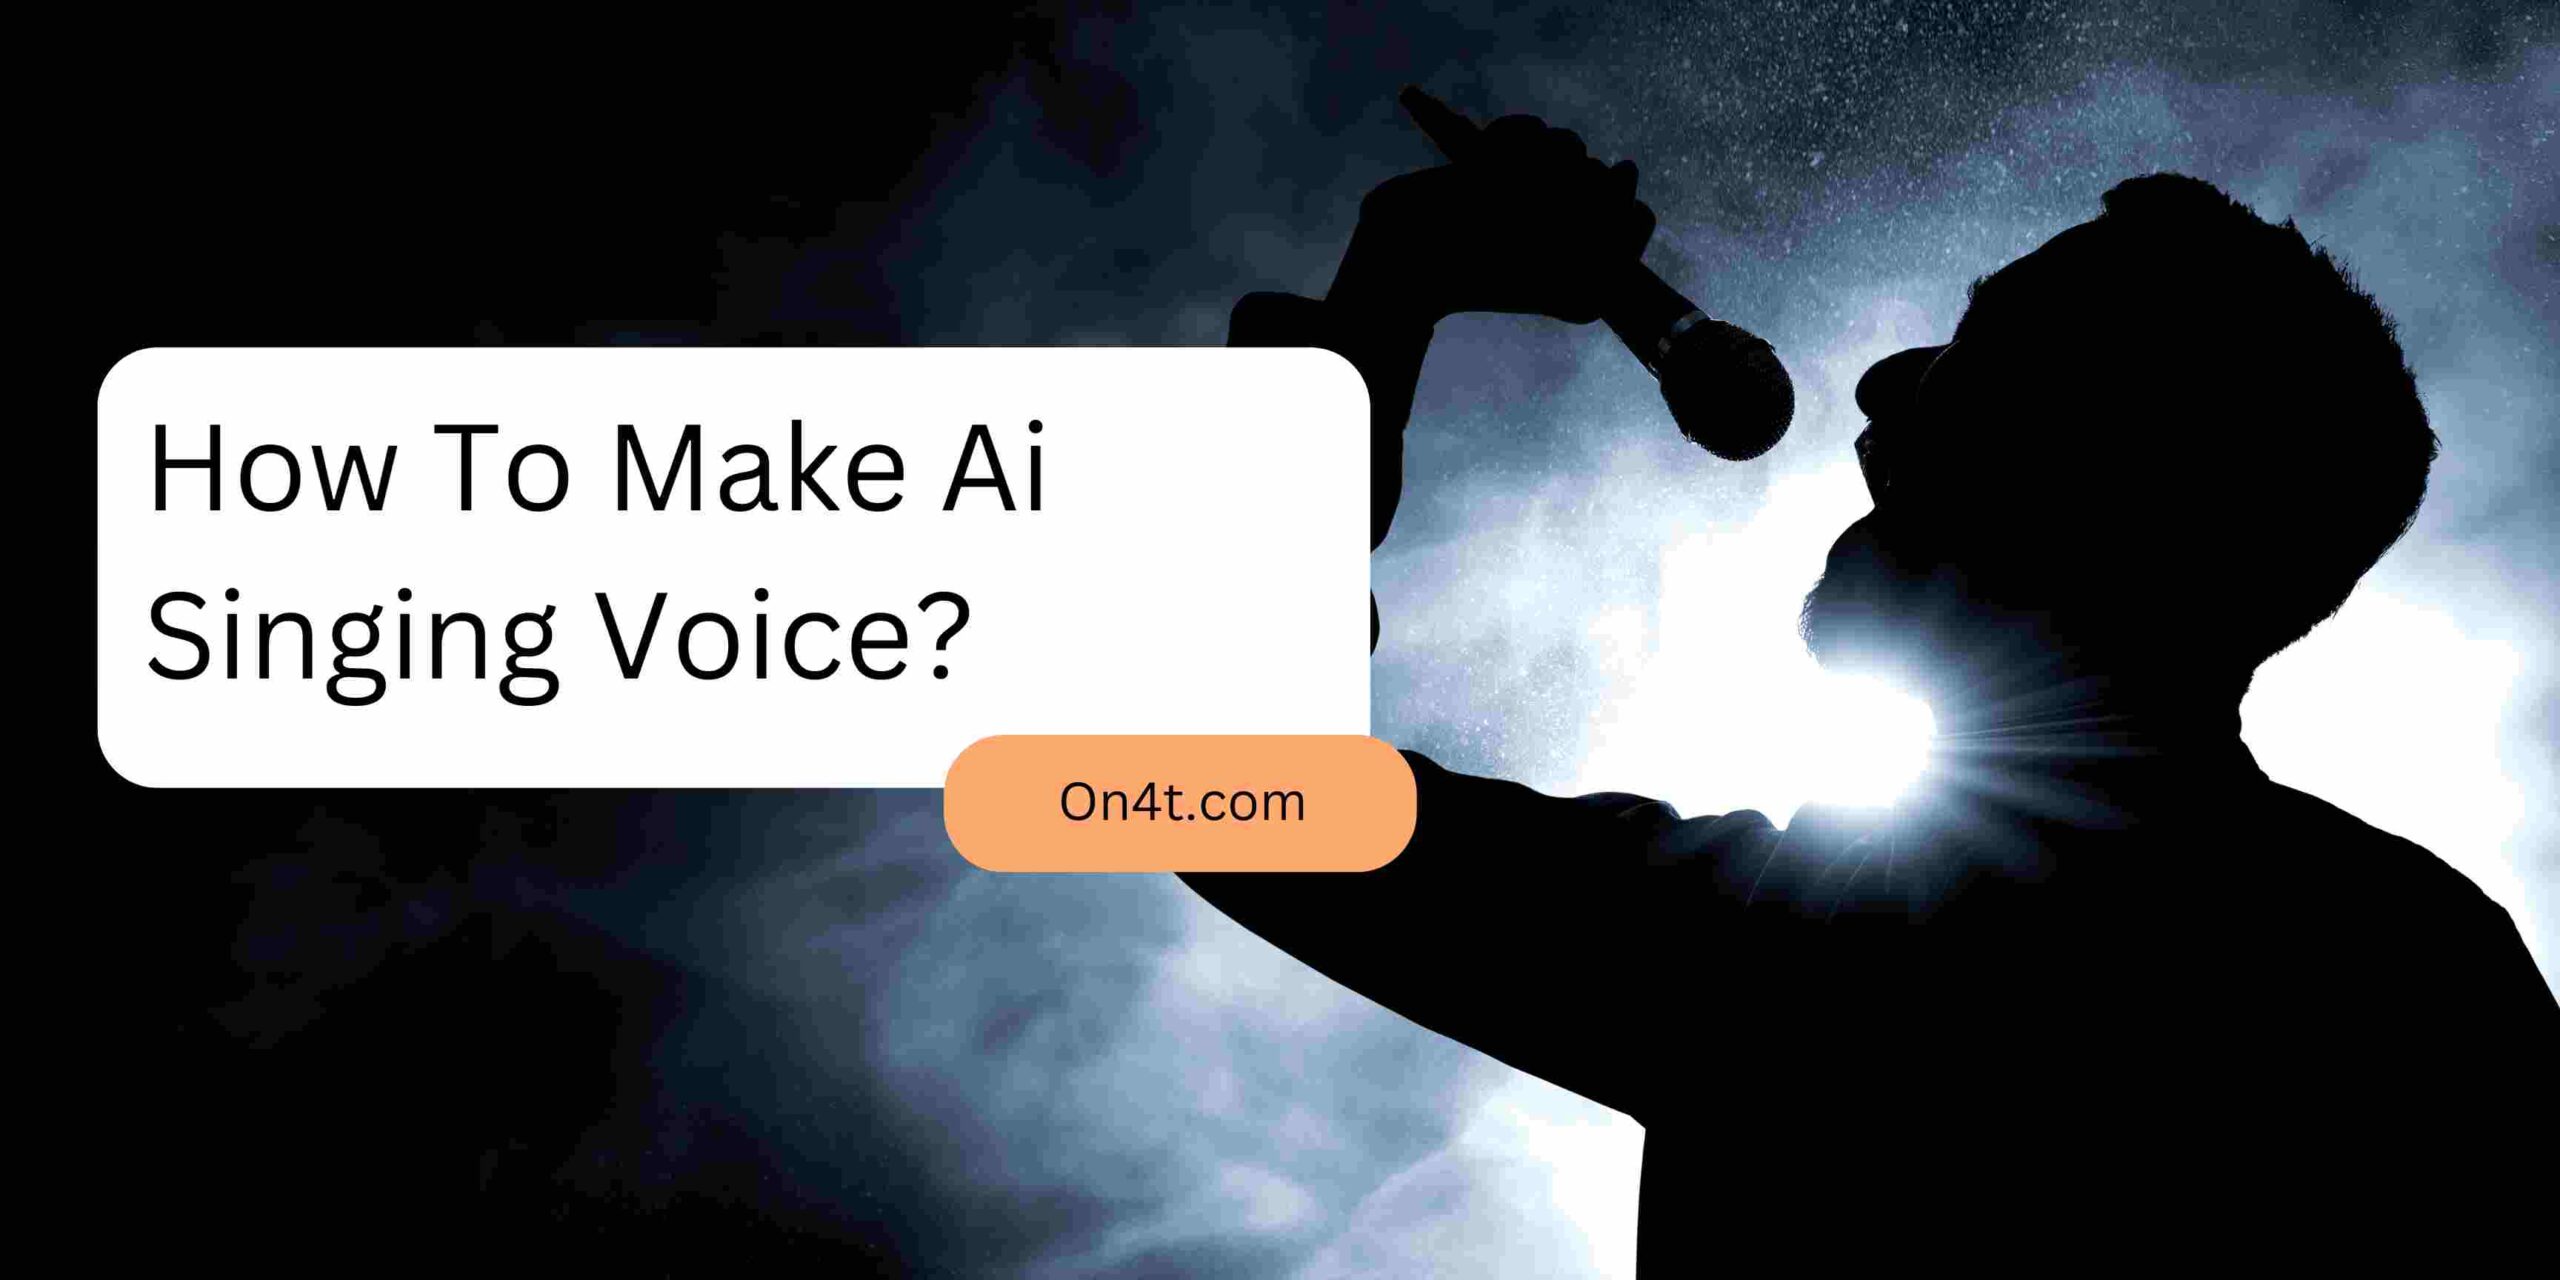 How To Make Ai Singing Voice?